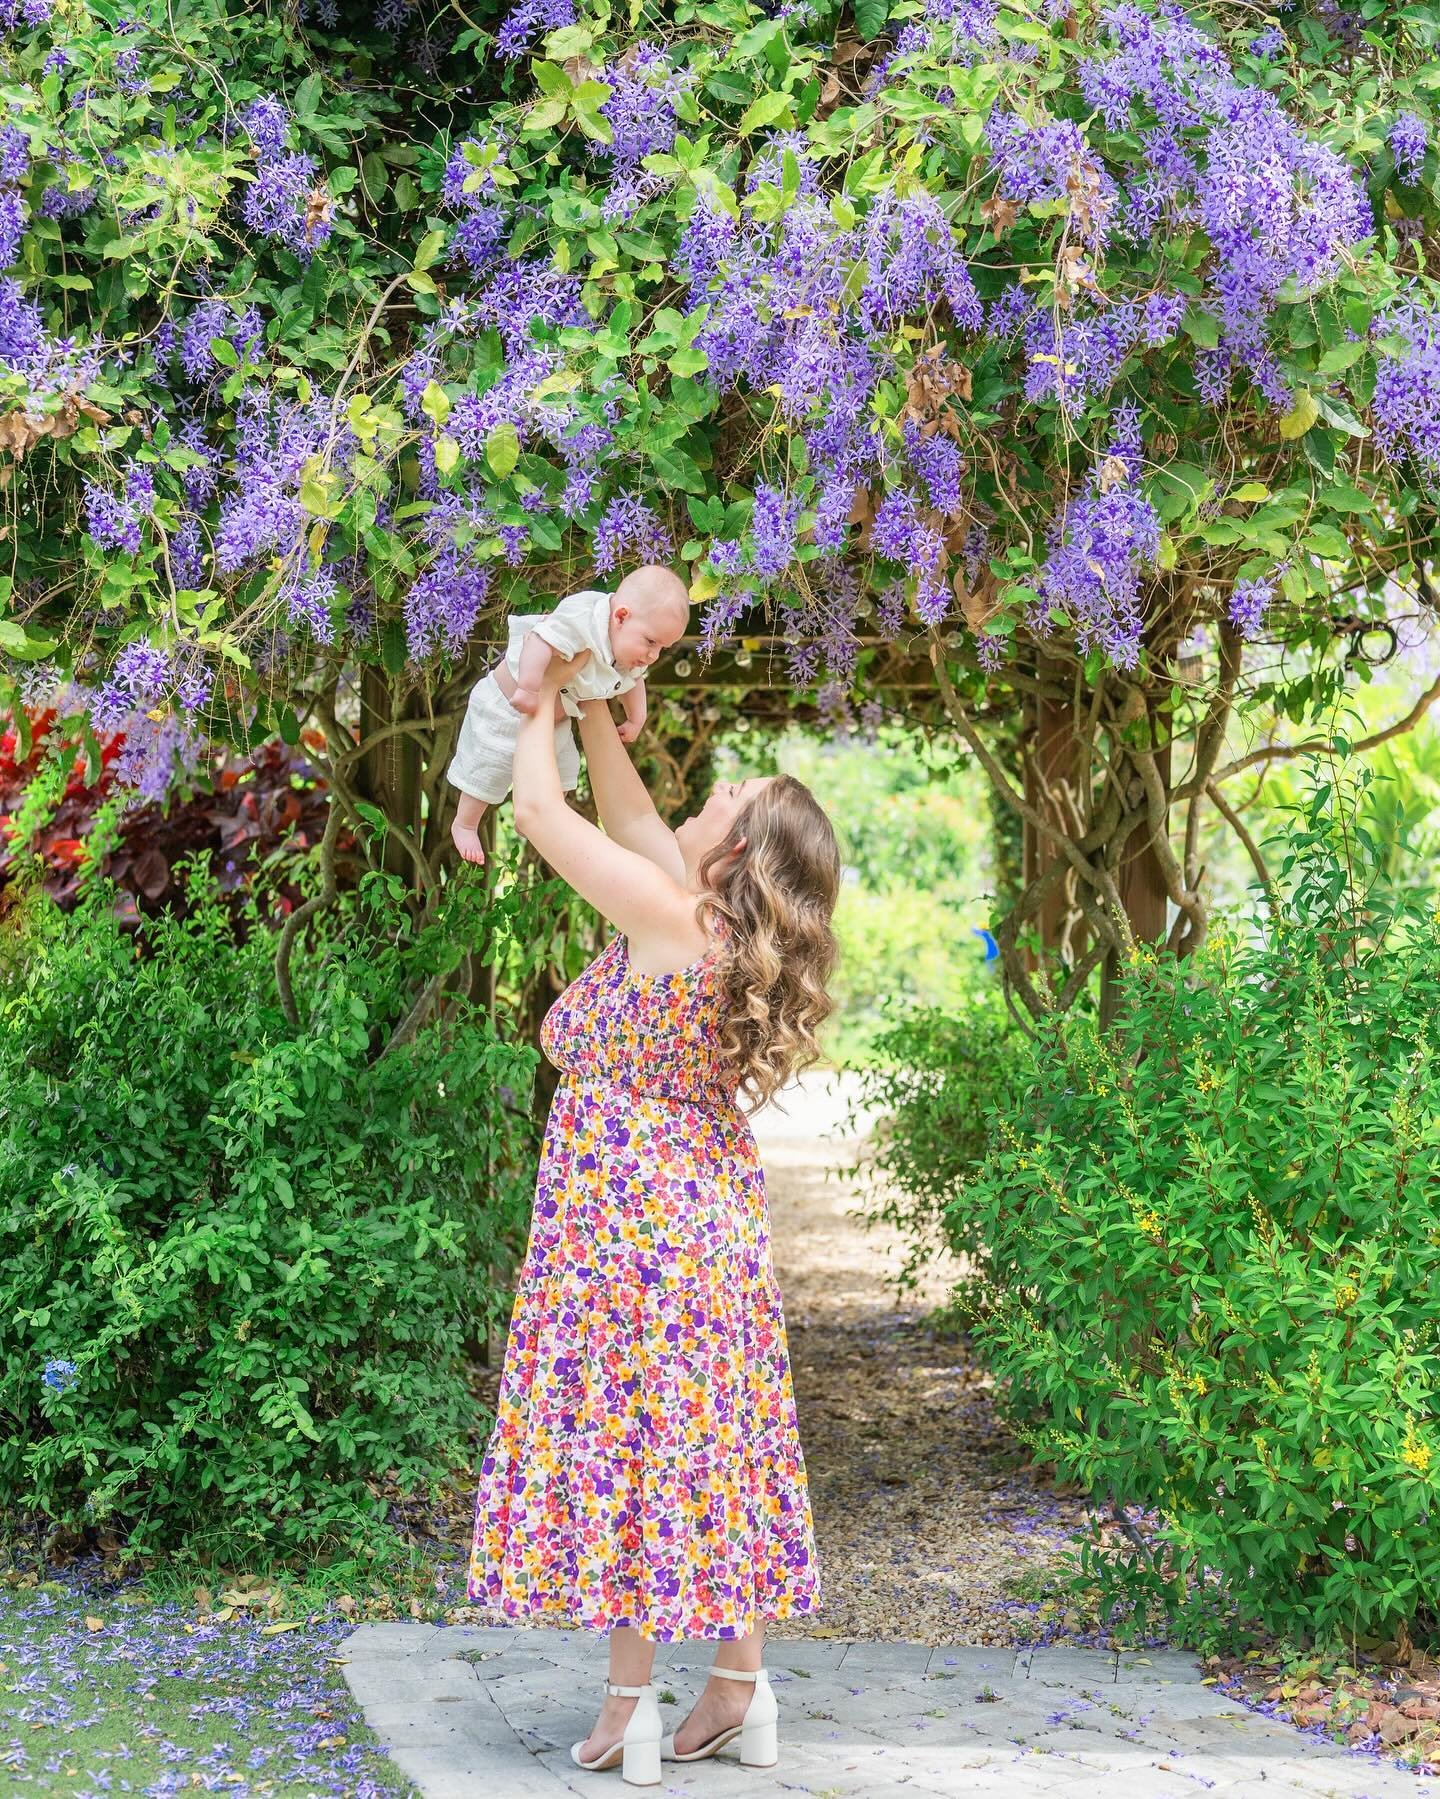 The last day of mommy and me in the gardens did not disappoint! Wow I am so grateful to have photographed these amazing mamas with their babies 🥰